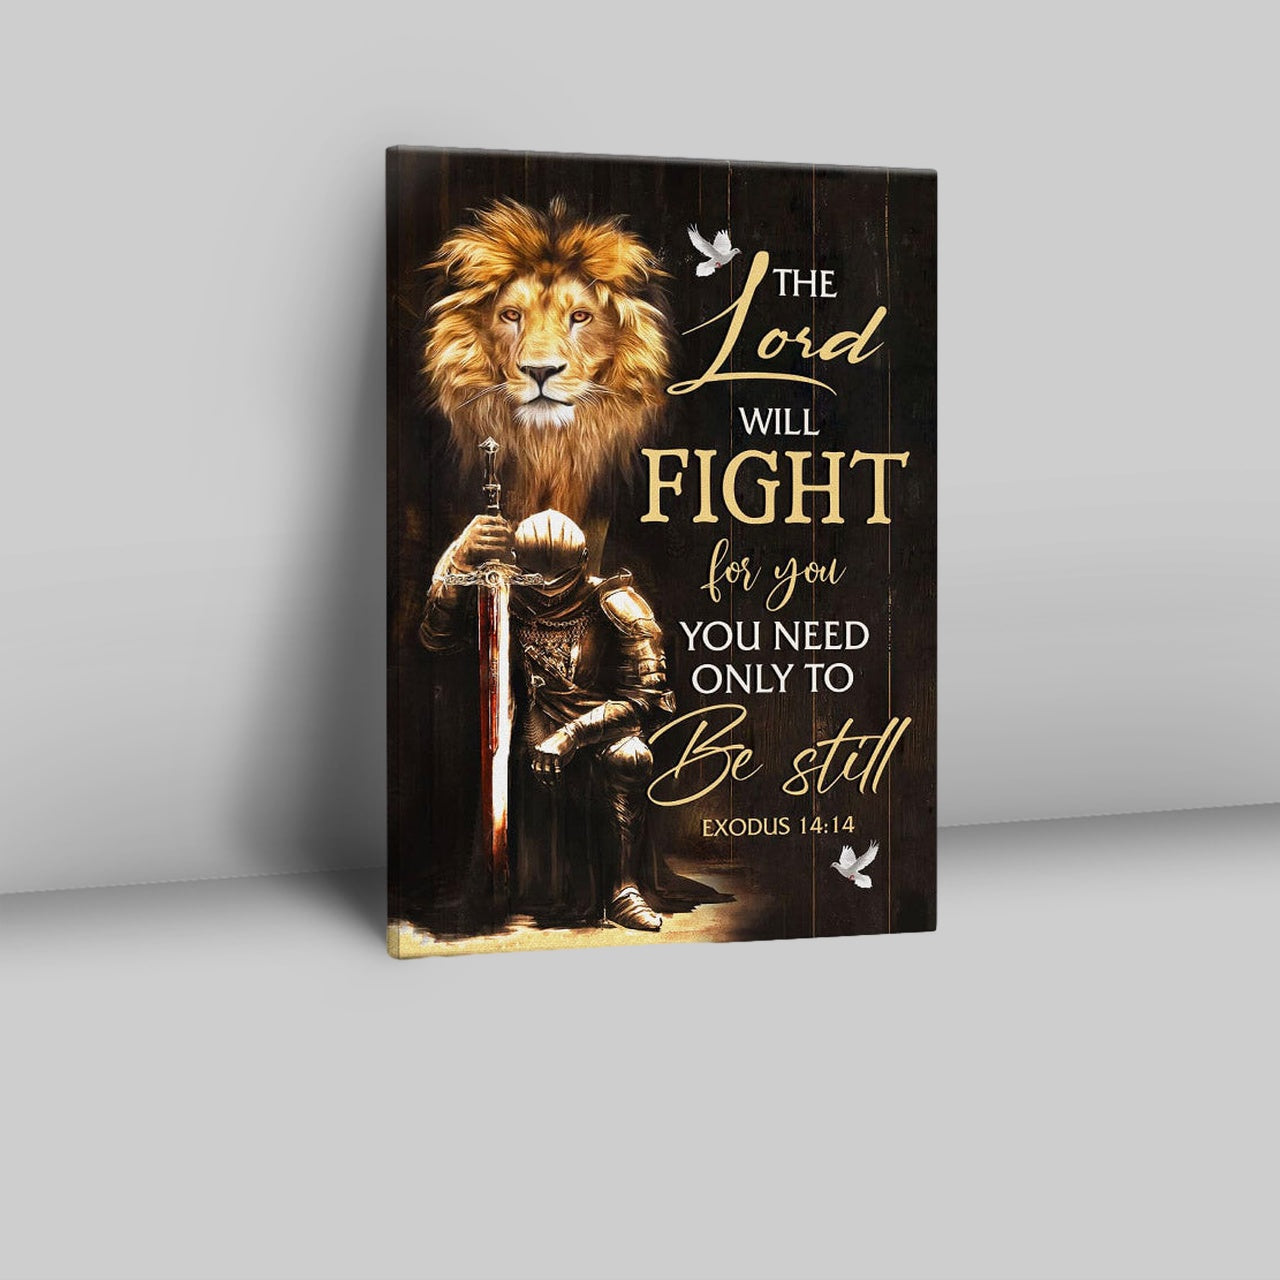 Christian Warrior Exodus 1414 The Lord Will Fight For You Canvas Prints - Bible Verse Wall Decor - Scripture Wall Art